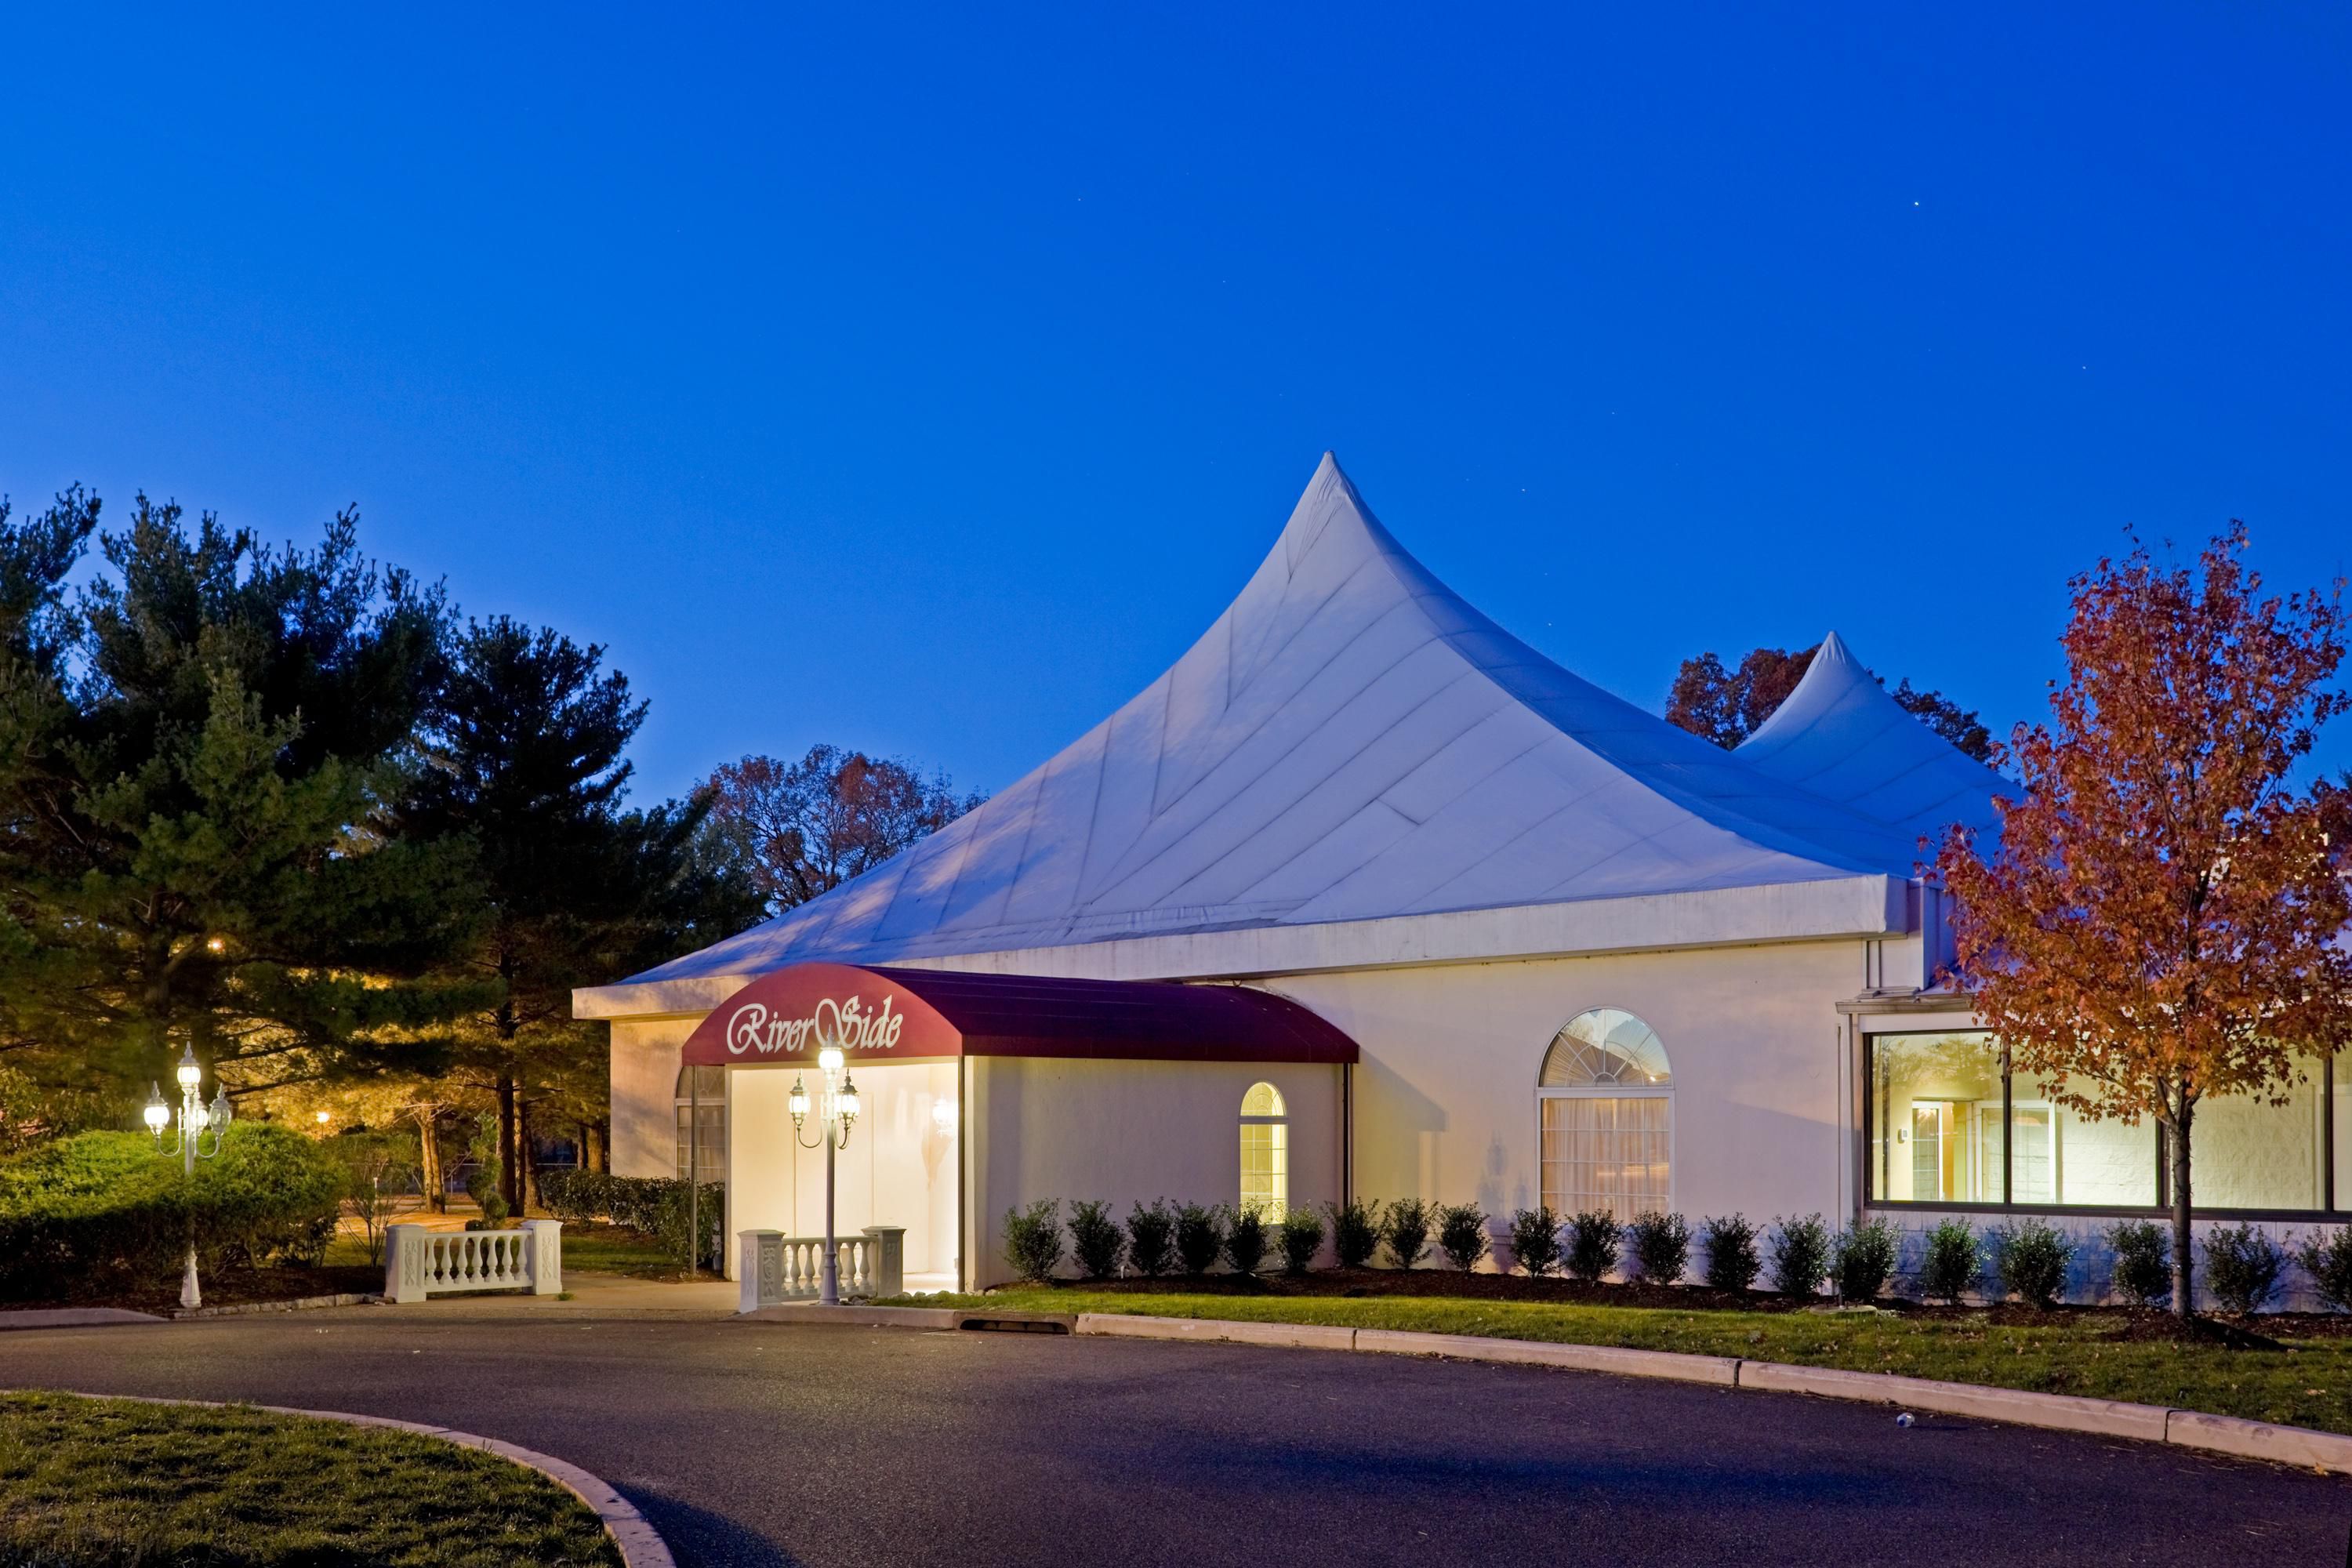 Riverside Pavilion can accommodate 500 guests for banquet events